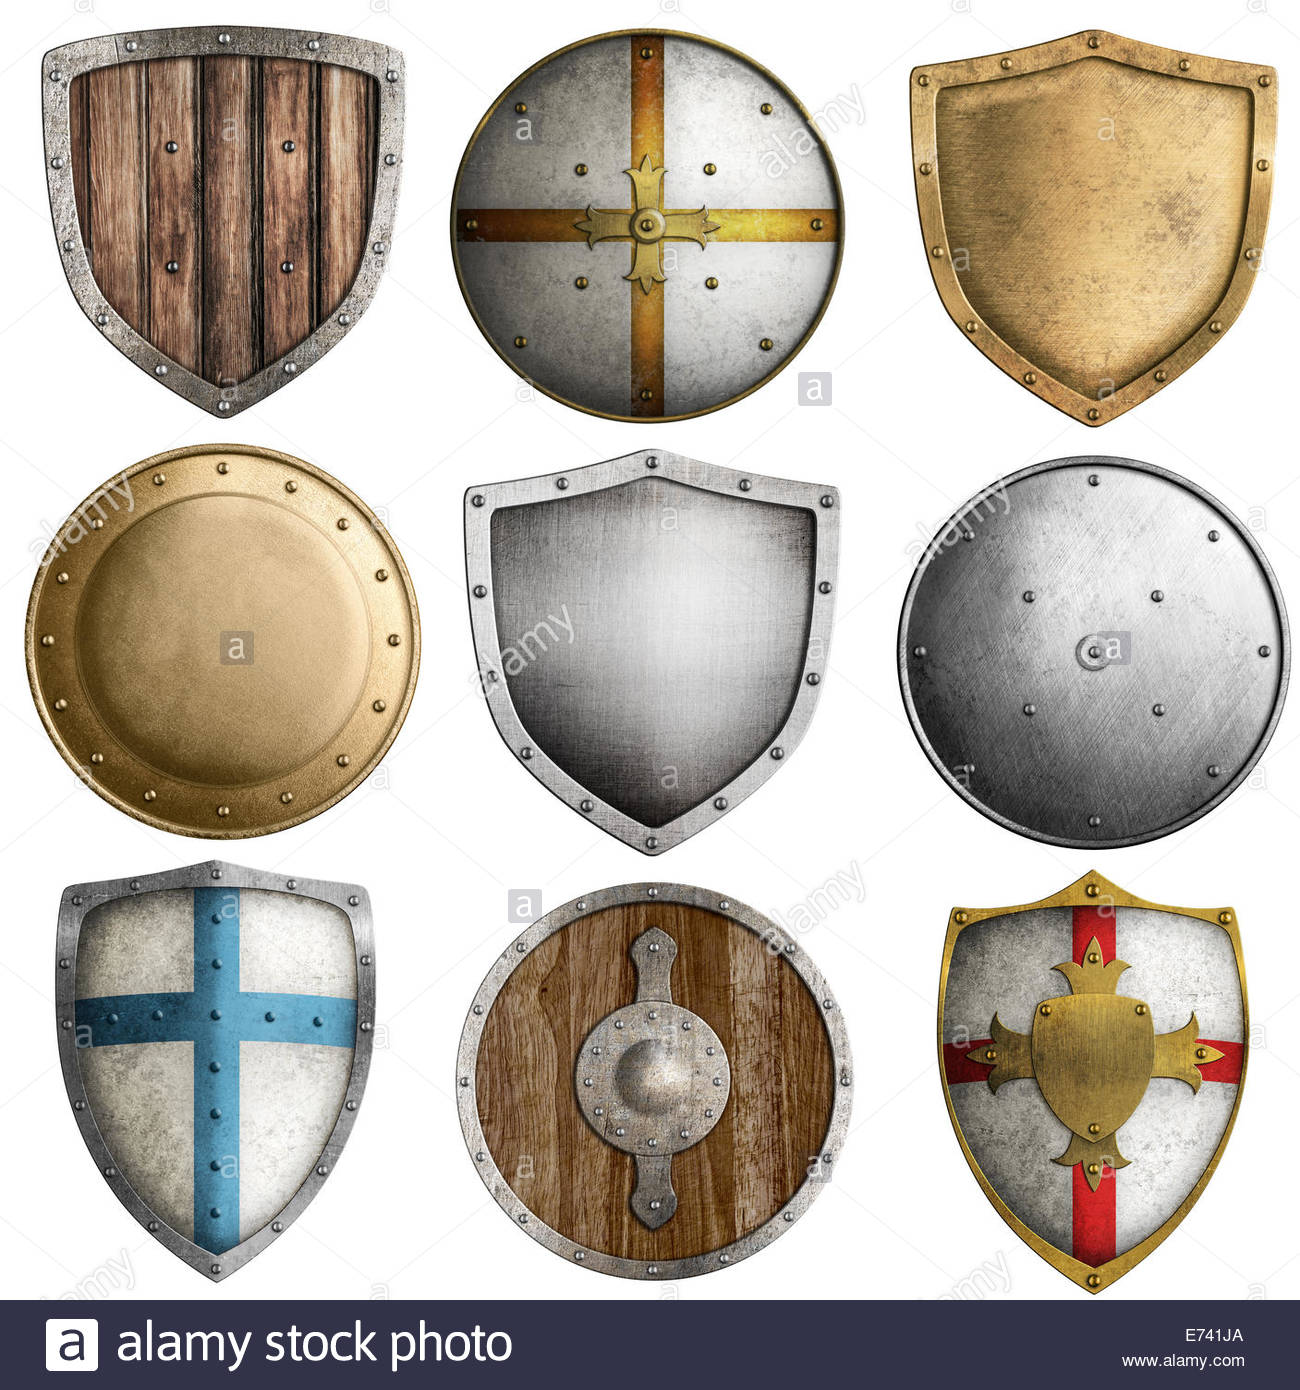 medieval-shields-collection-2-isolated-on-white-E741JA.jpg